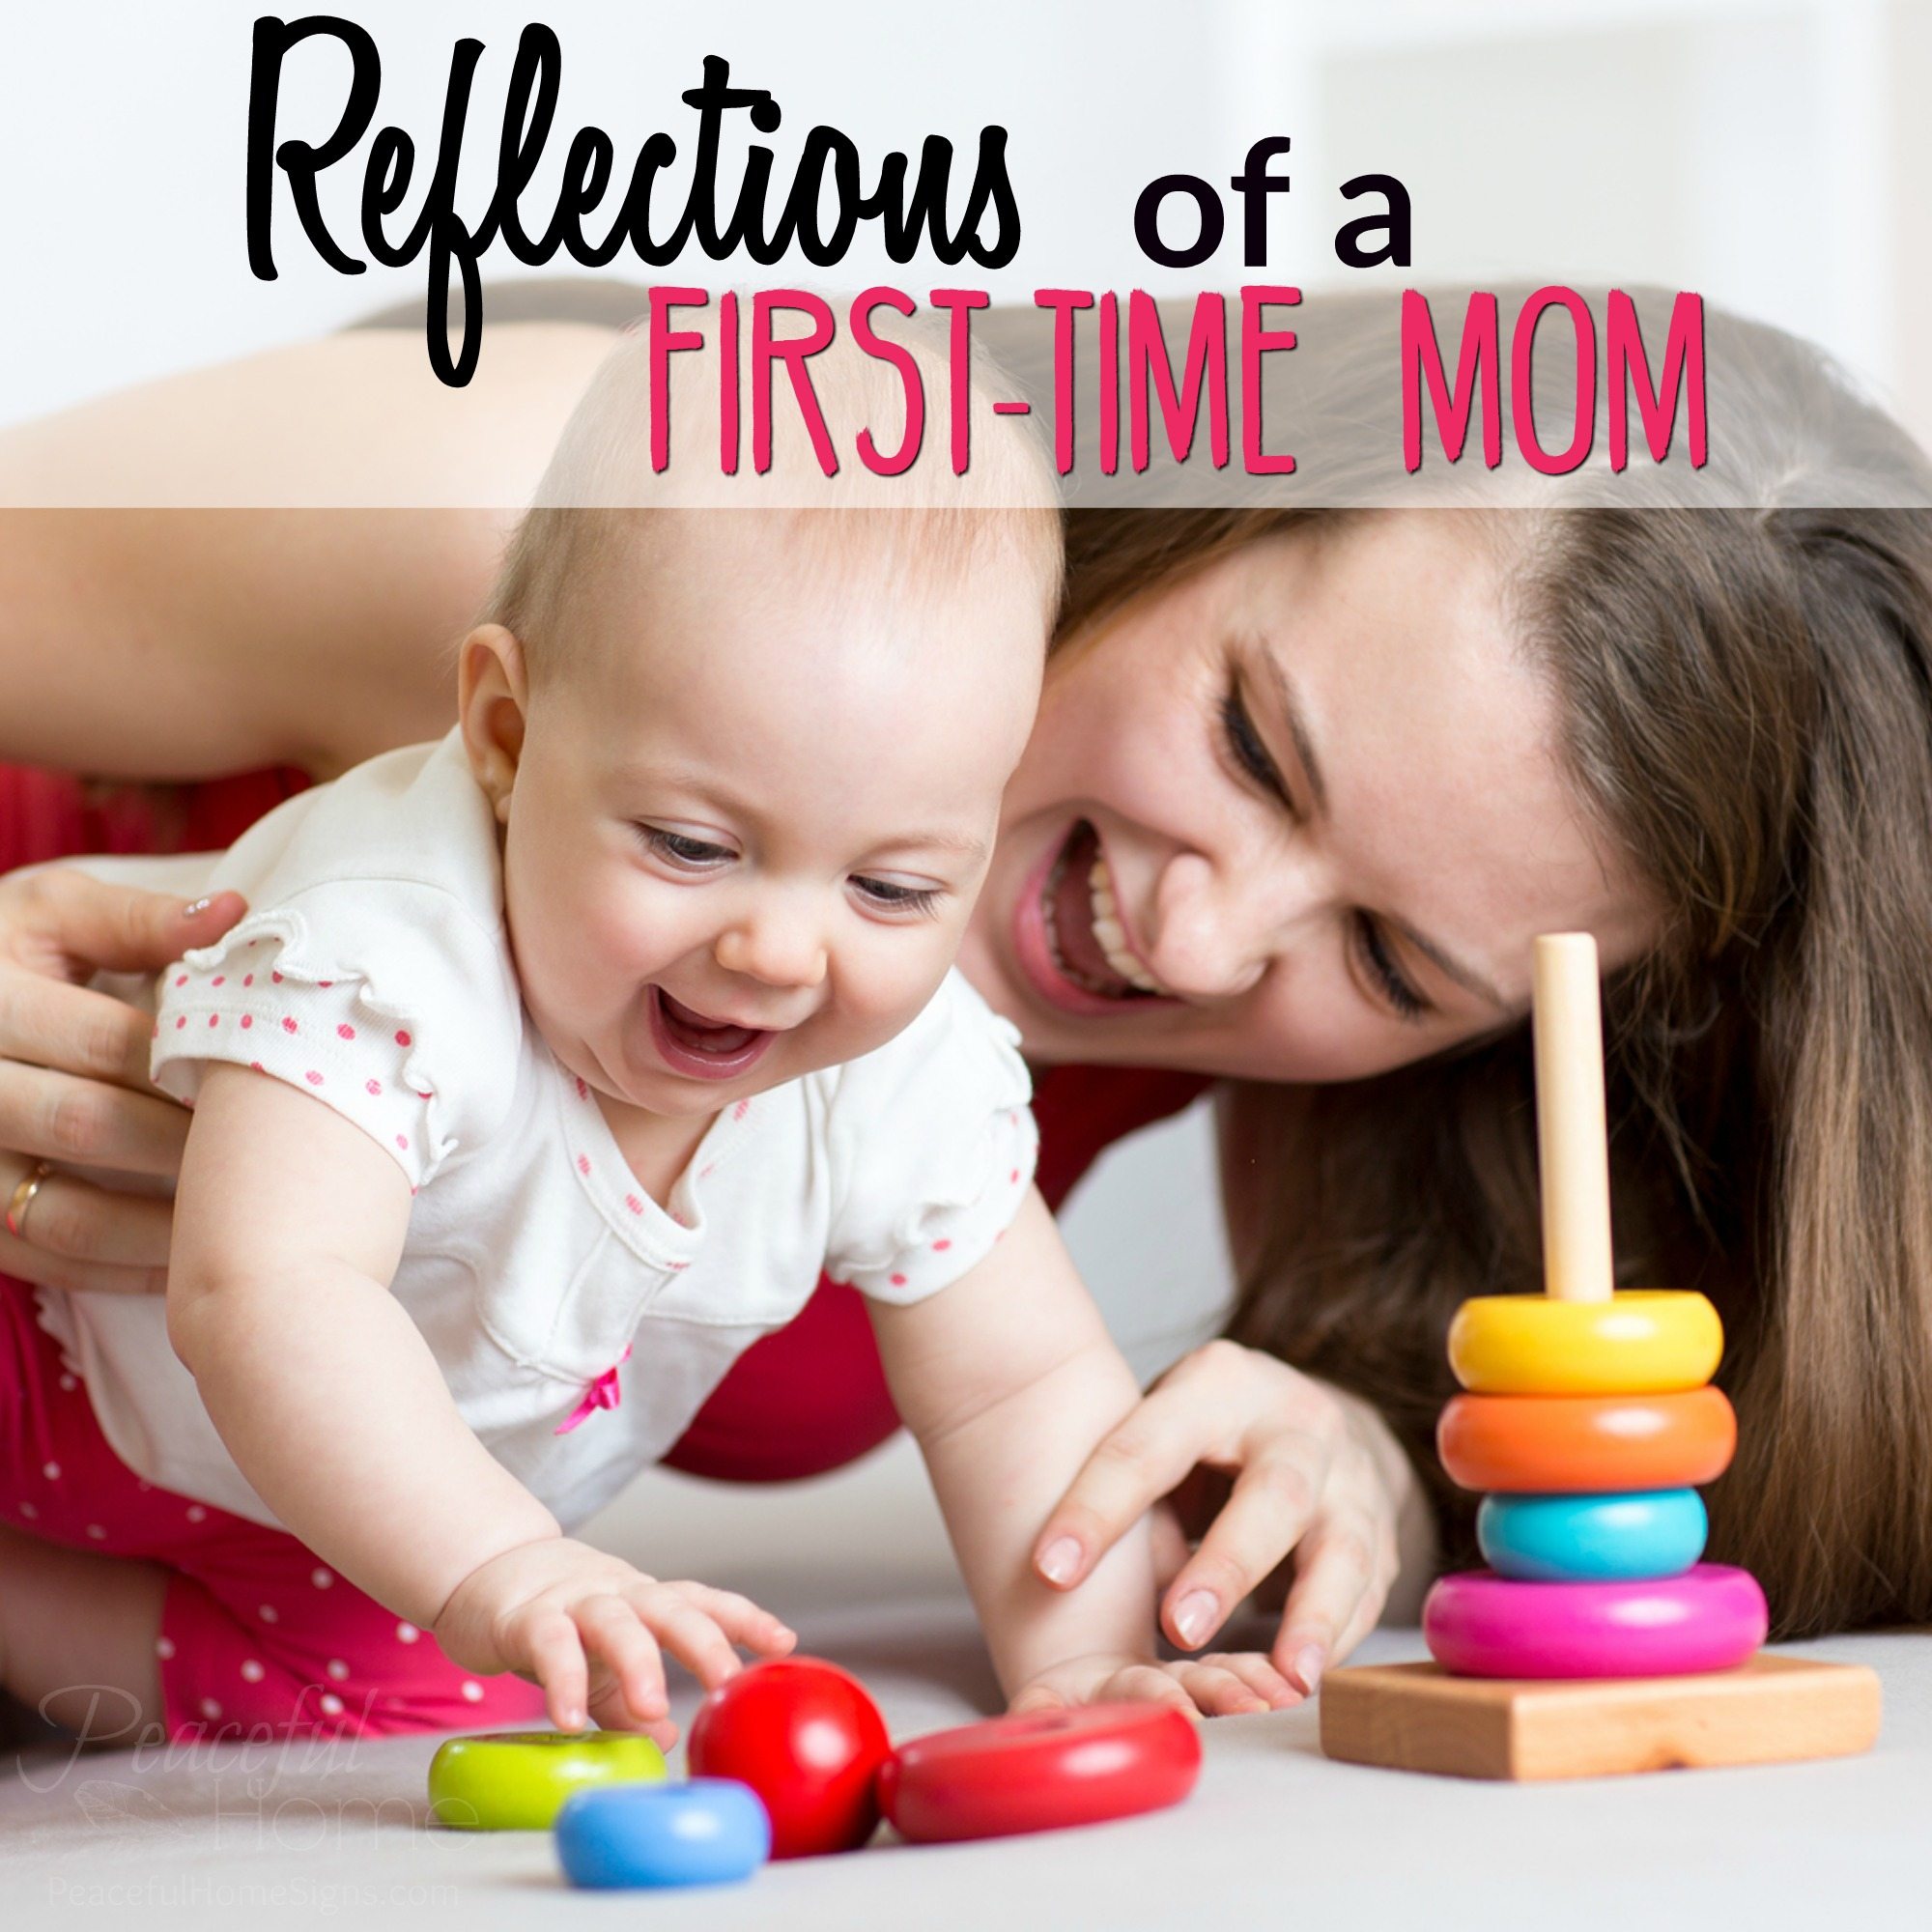 Reflections of a First-Time-Mom